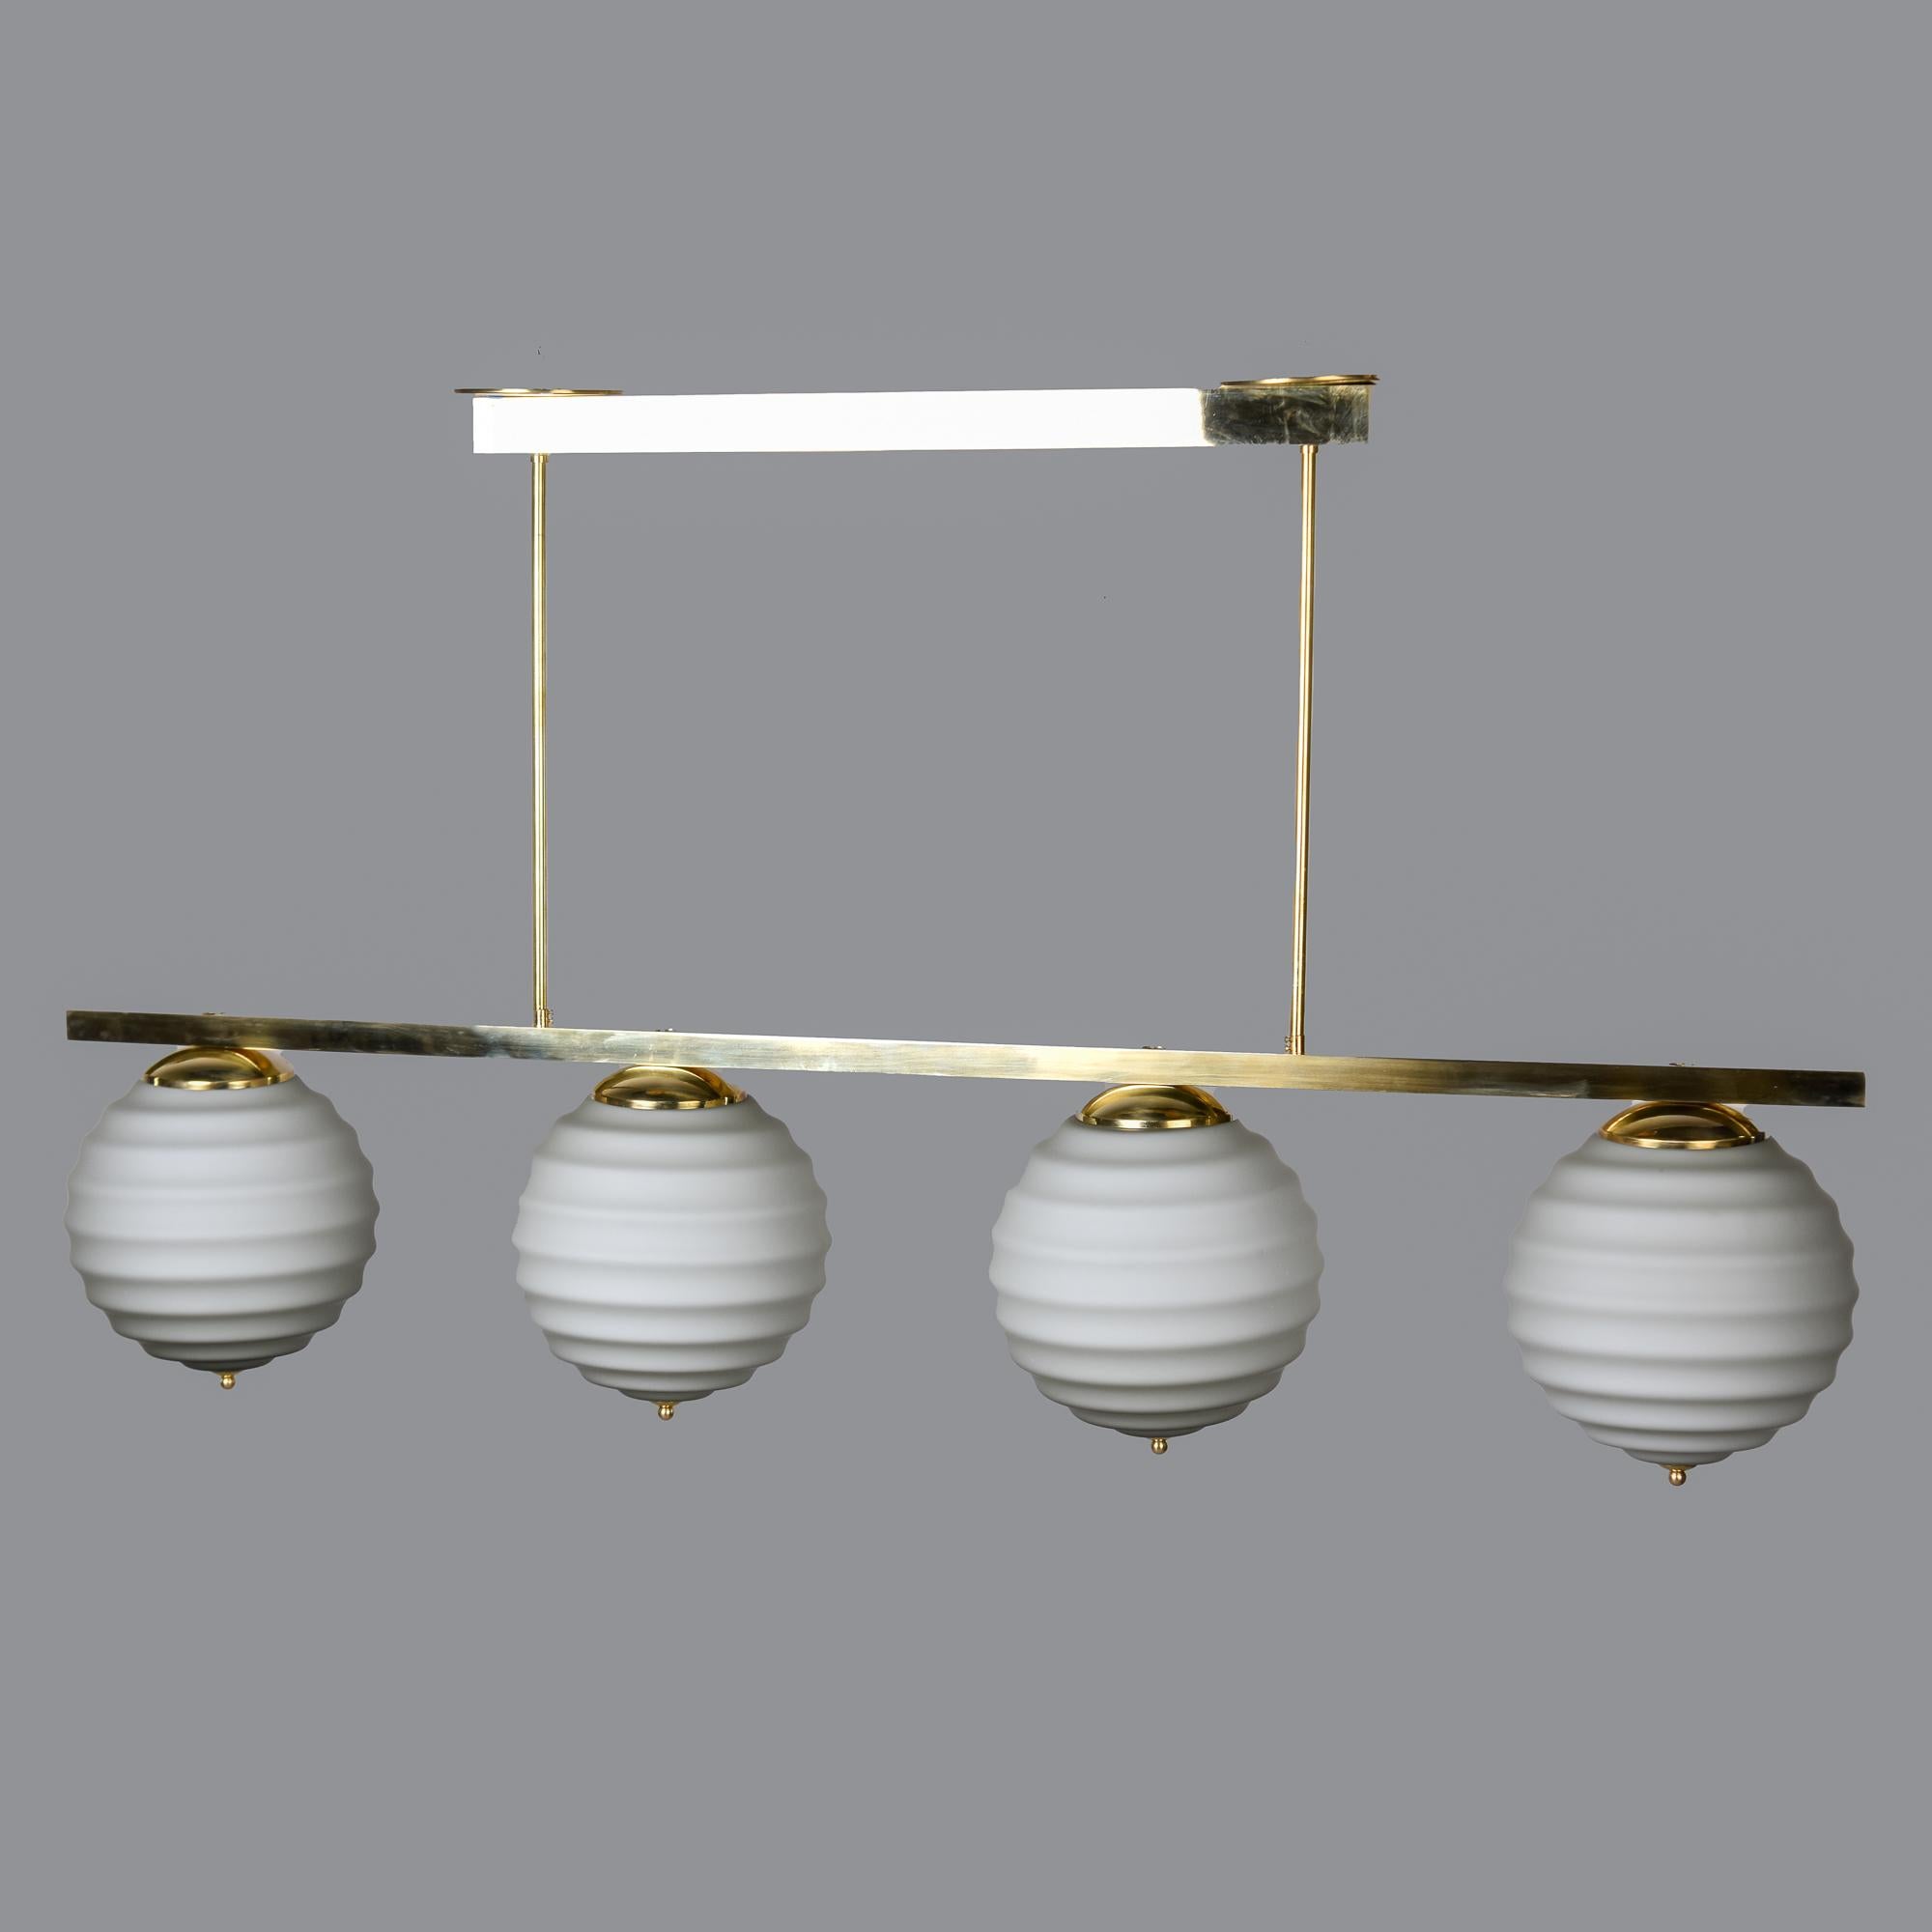 New glass and brass four light fixture imported from Italy. Polished brass canopy and base with four glass globes. Globes are very pale taupe in color and have a ridged surface texture. Fixture has been wired for US electrical standards.